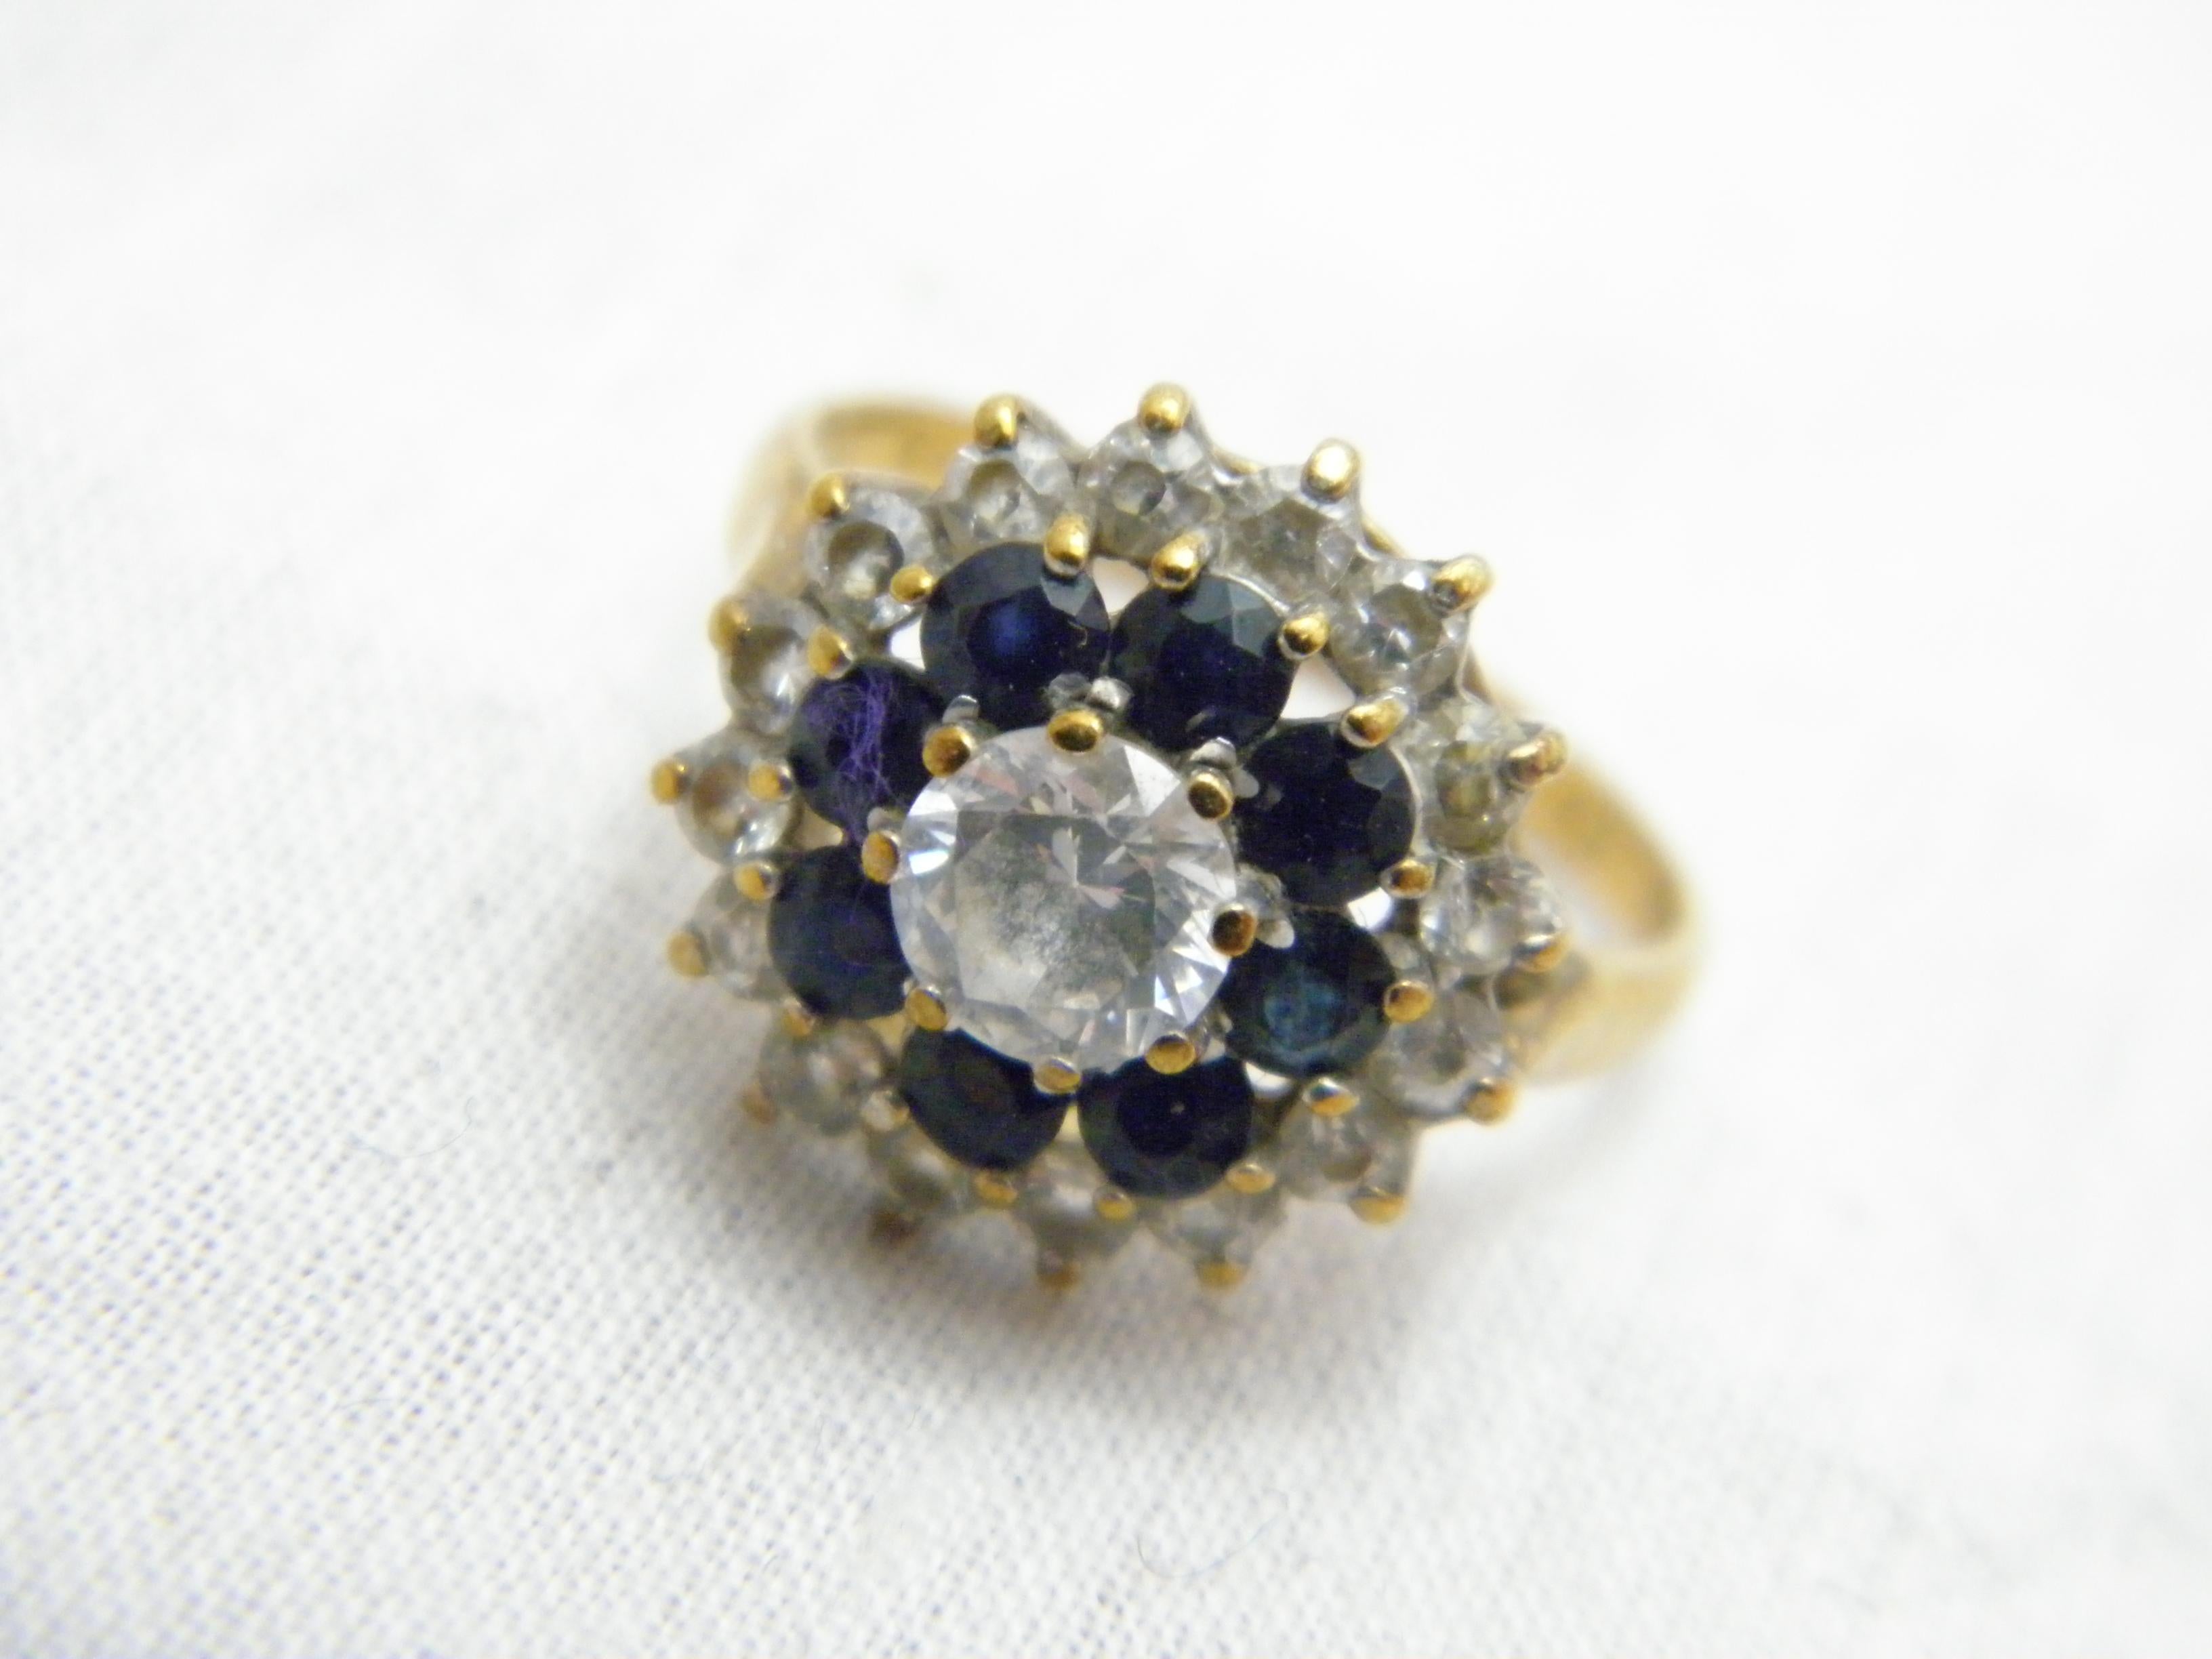 If you have landed on this page then you have an eye for beauty.

On offer is this gorgeous

9CT GOLD SAPPHIRE AND DIAMOND PASTE CLUSTER COCKTAIL RING

DETAILS
Material: 9ct 375/000 Yellow Gold
This ring has a sturdy shank hence ideal if resizing